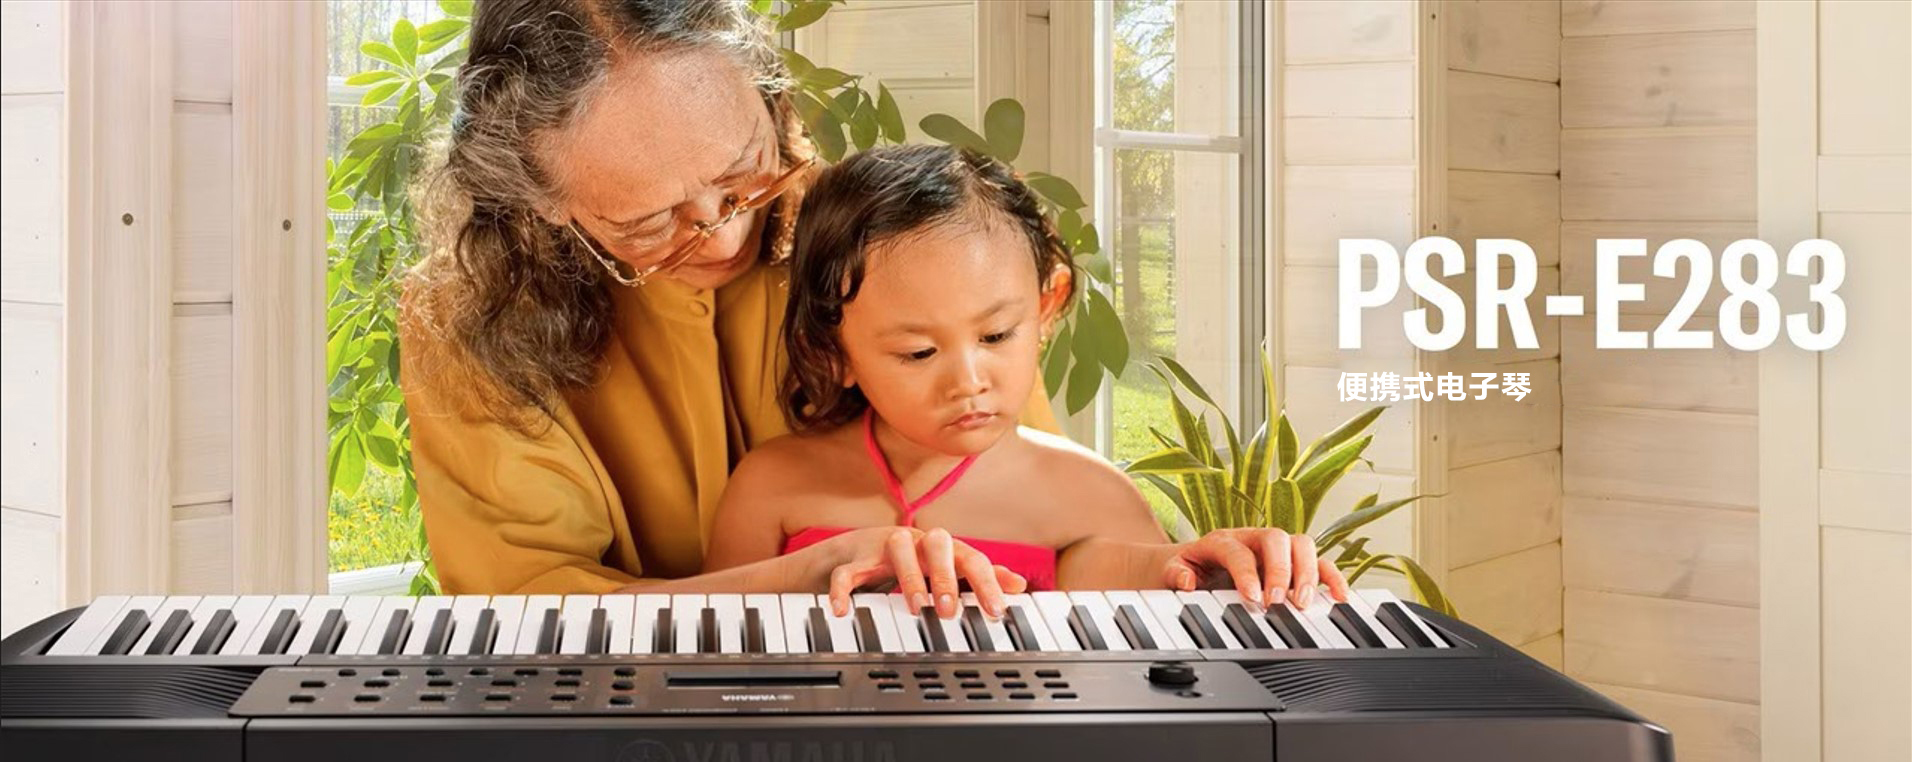 A grandmother and a grandchild are playing the PSR-283